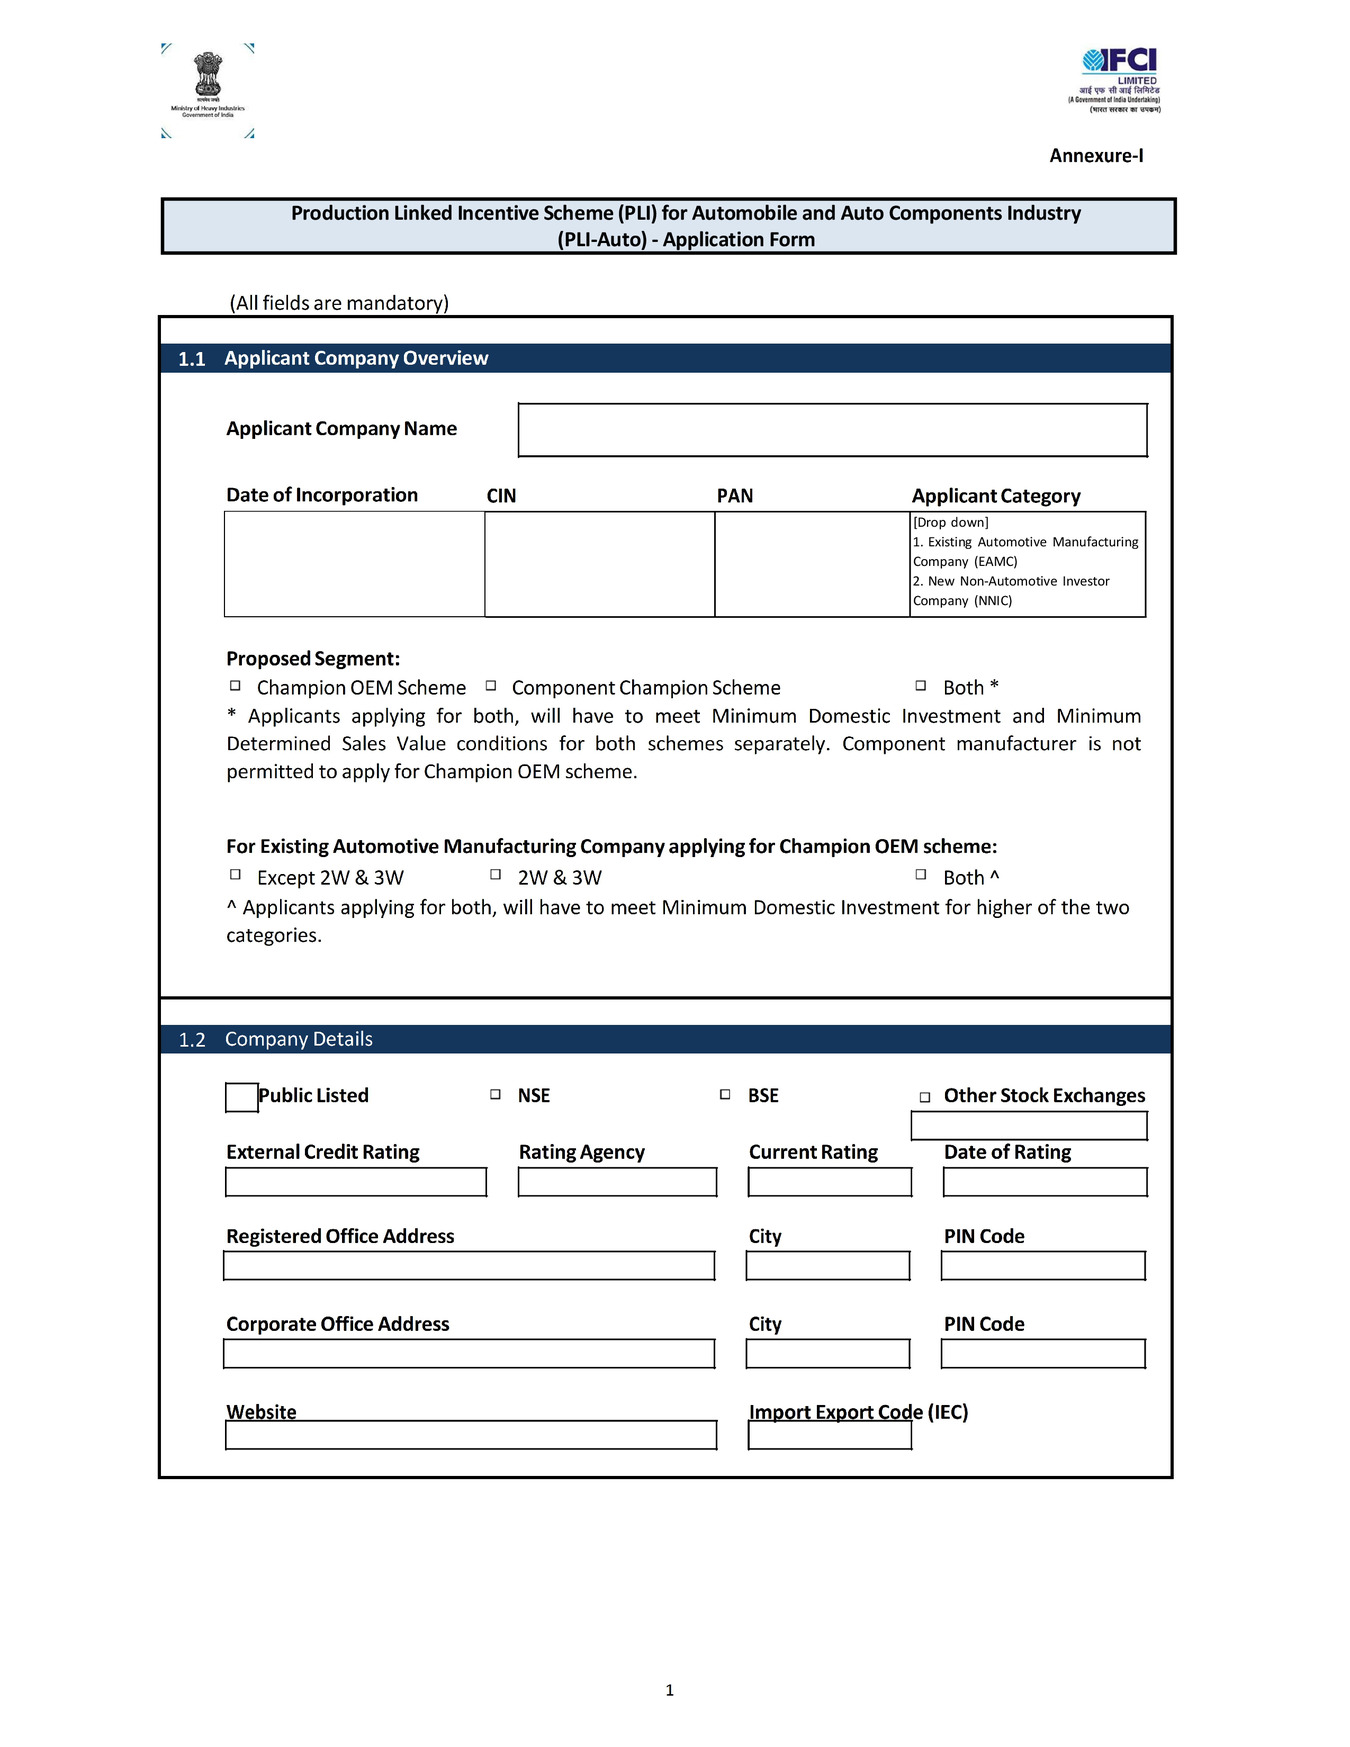 PLI Scheme for Automobile and Auto Component Industry Application Form 2024 PDF